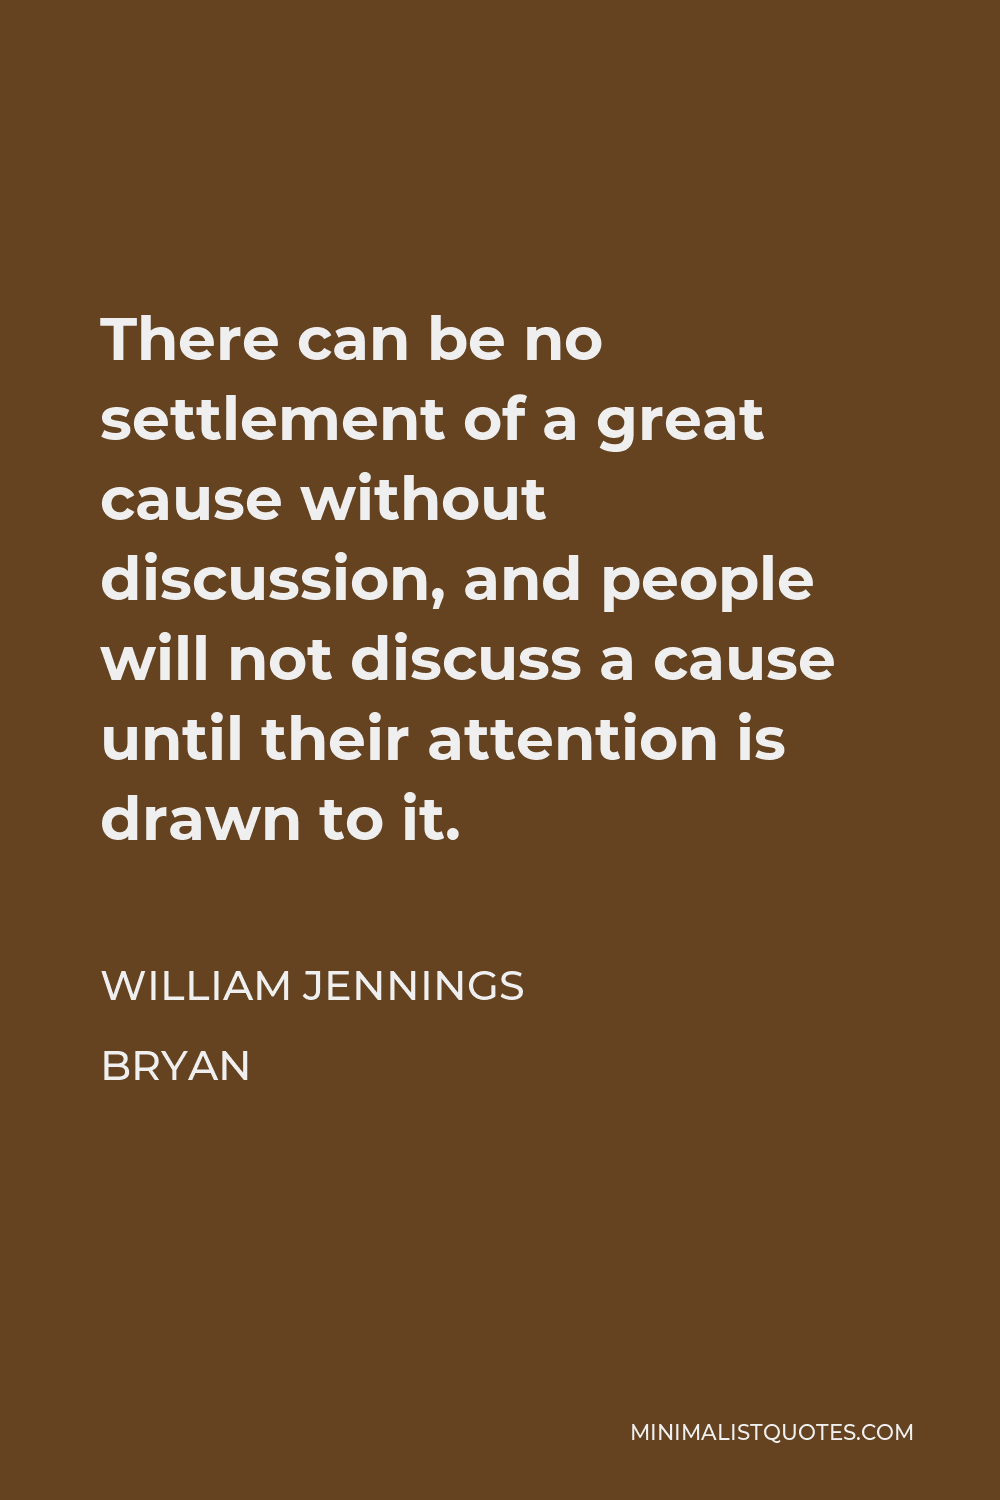 William Jennings Bryan Quote - There can be no settlement of a great cause without discussion, and people will not discuss a cause until their attention is drawn to it.